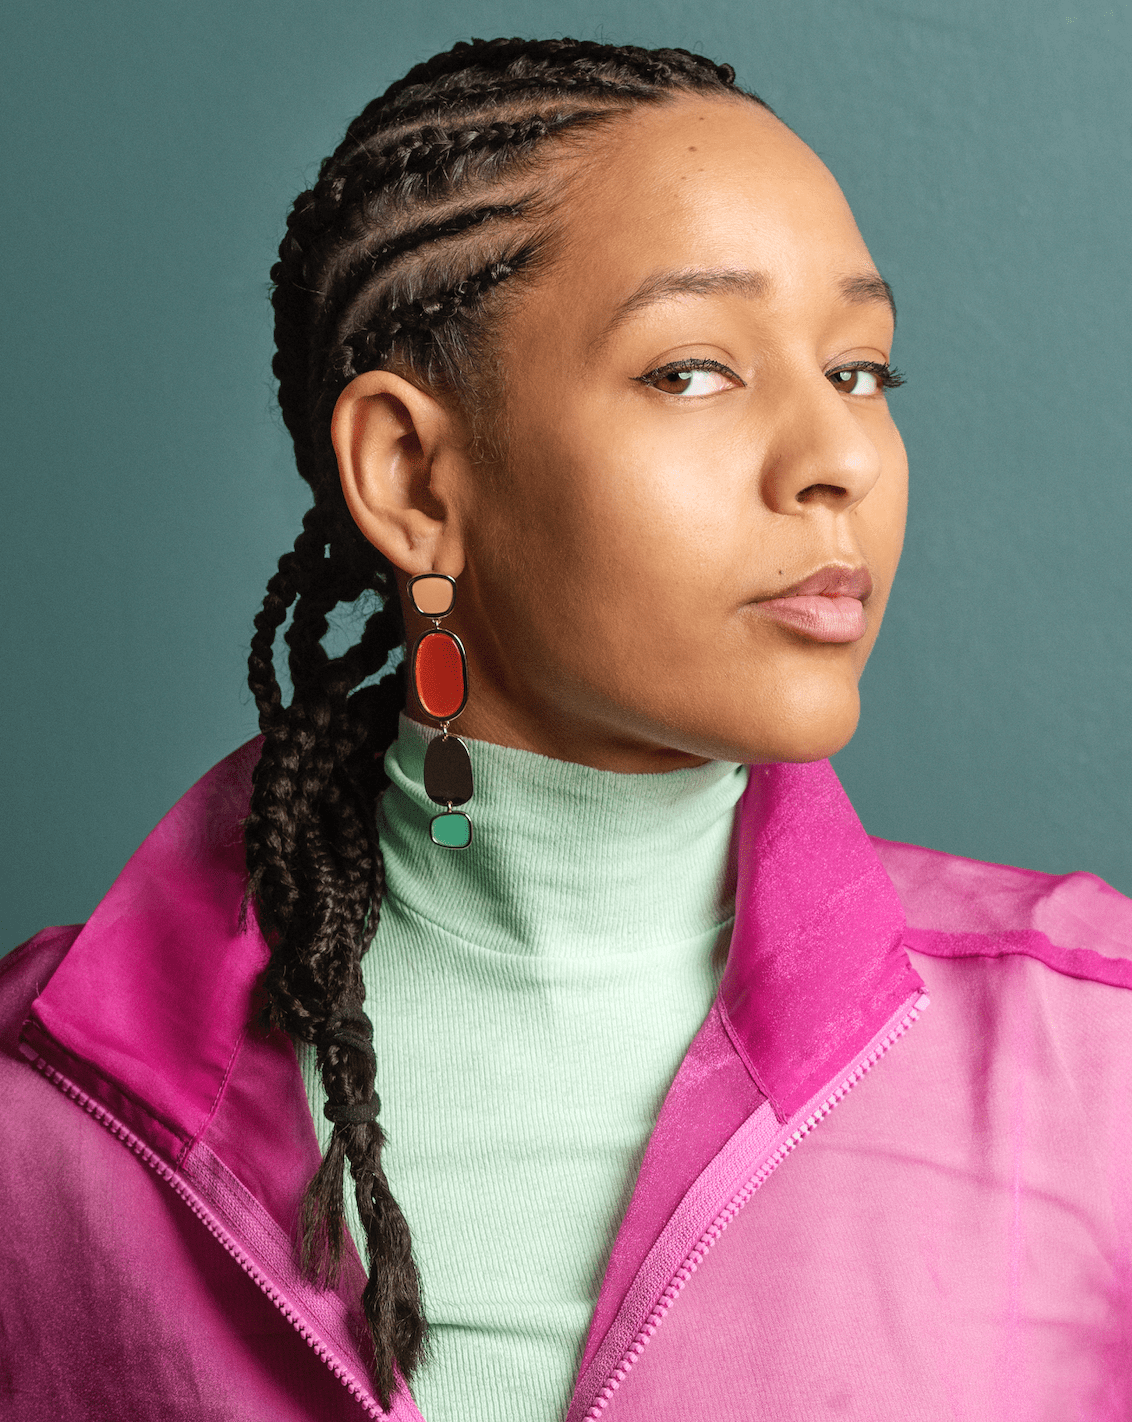 Portrait de Sonya Lindfors facing the camera wearing cornrows and a pink jacket.